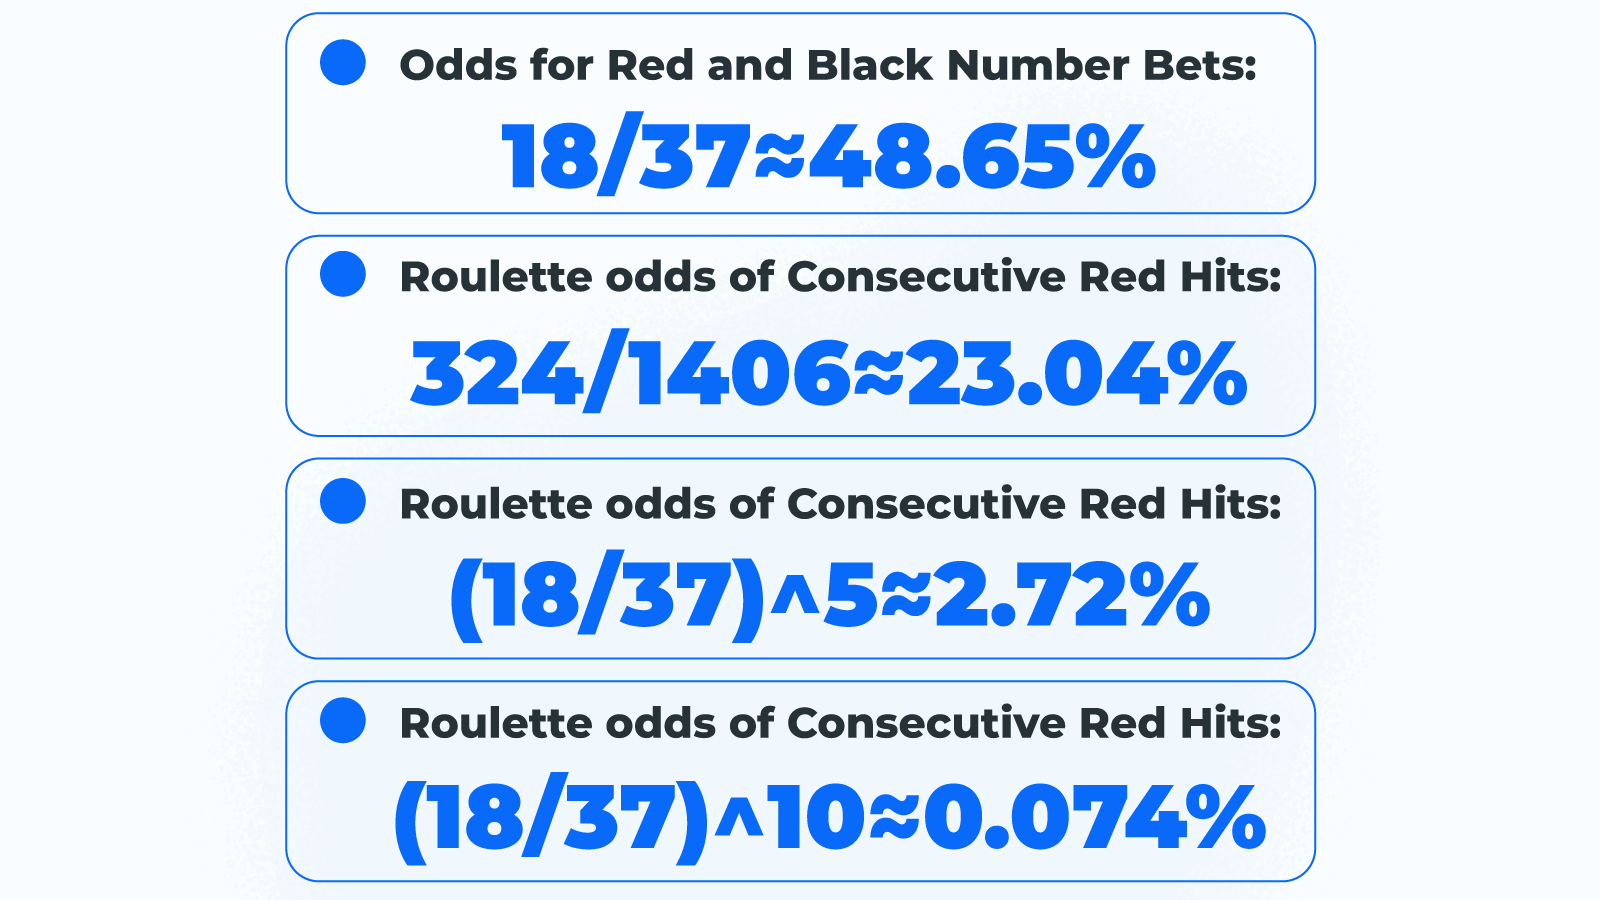 Odds for Red and Black Number Bets